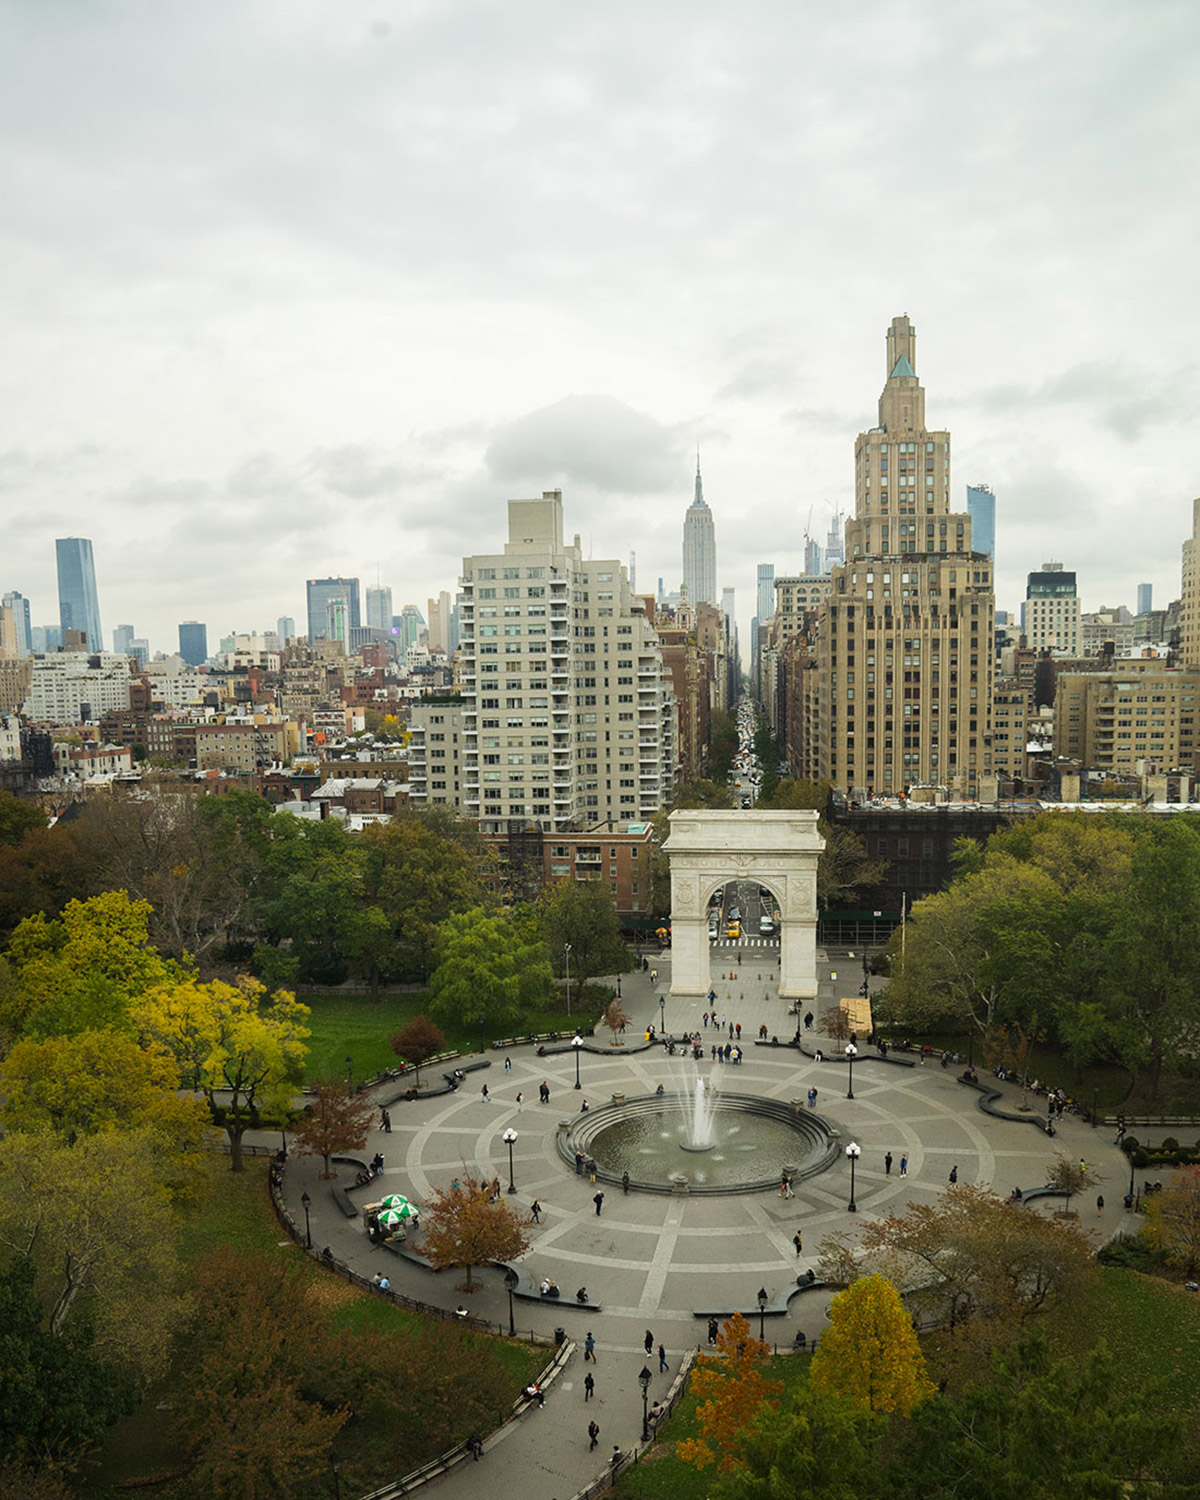 Washington Square Park from aerial view